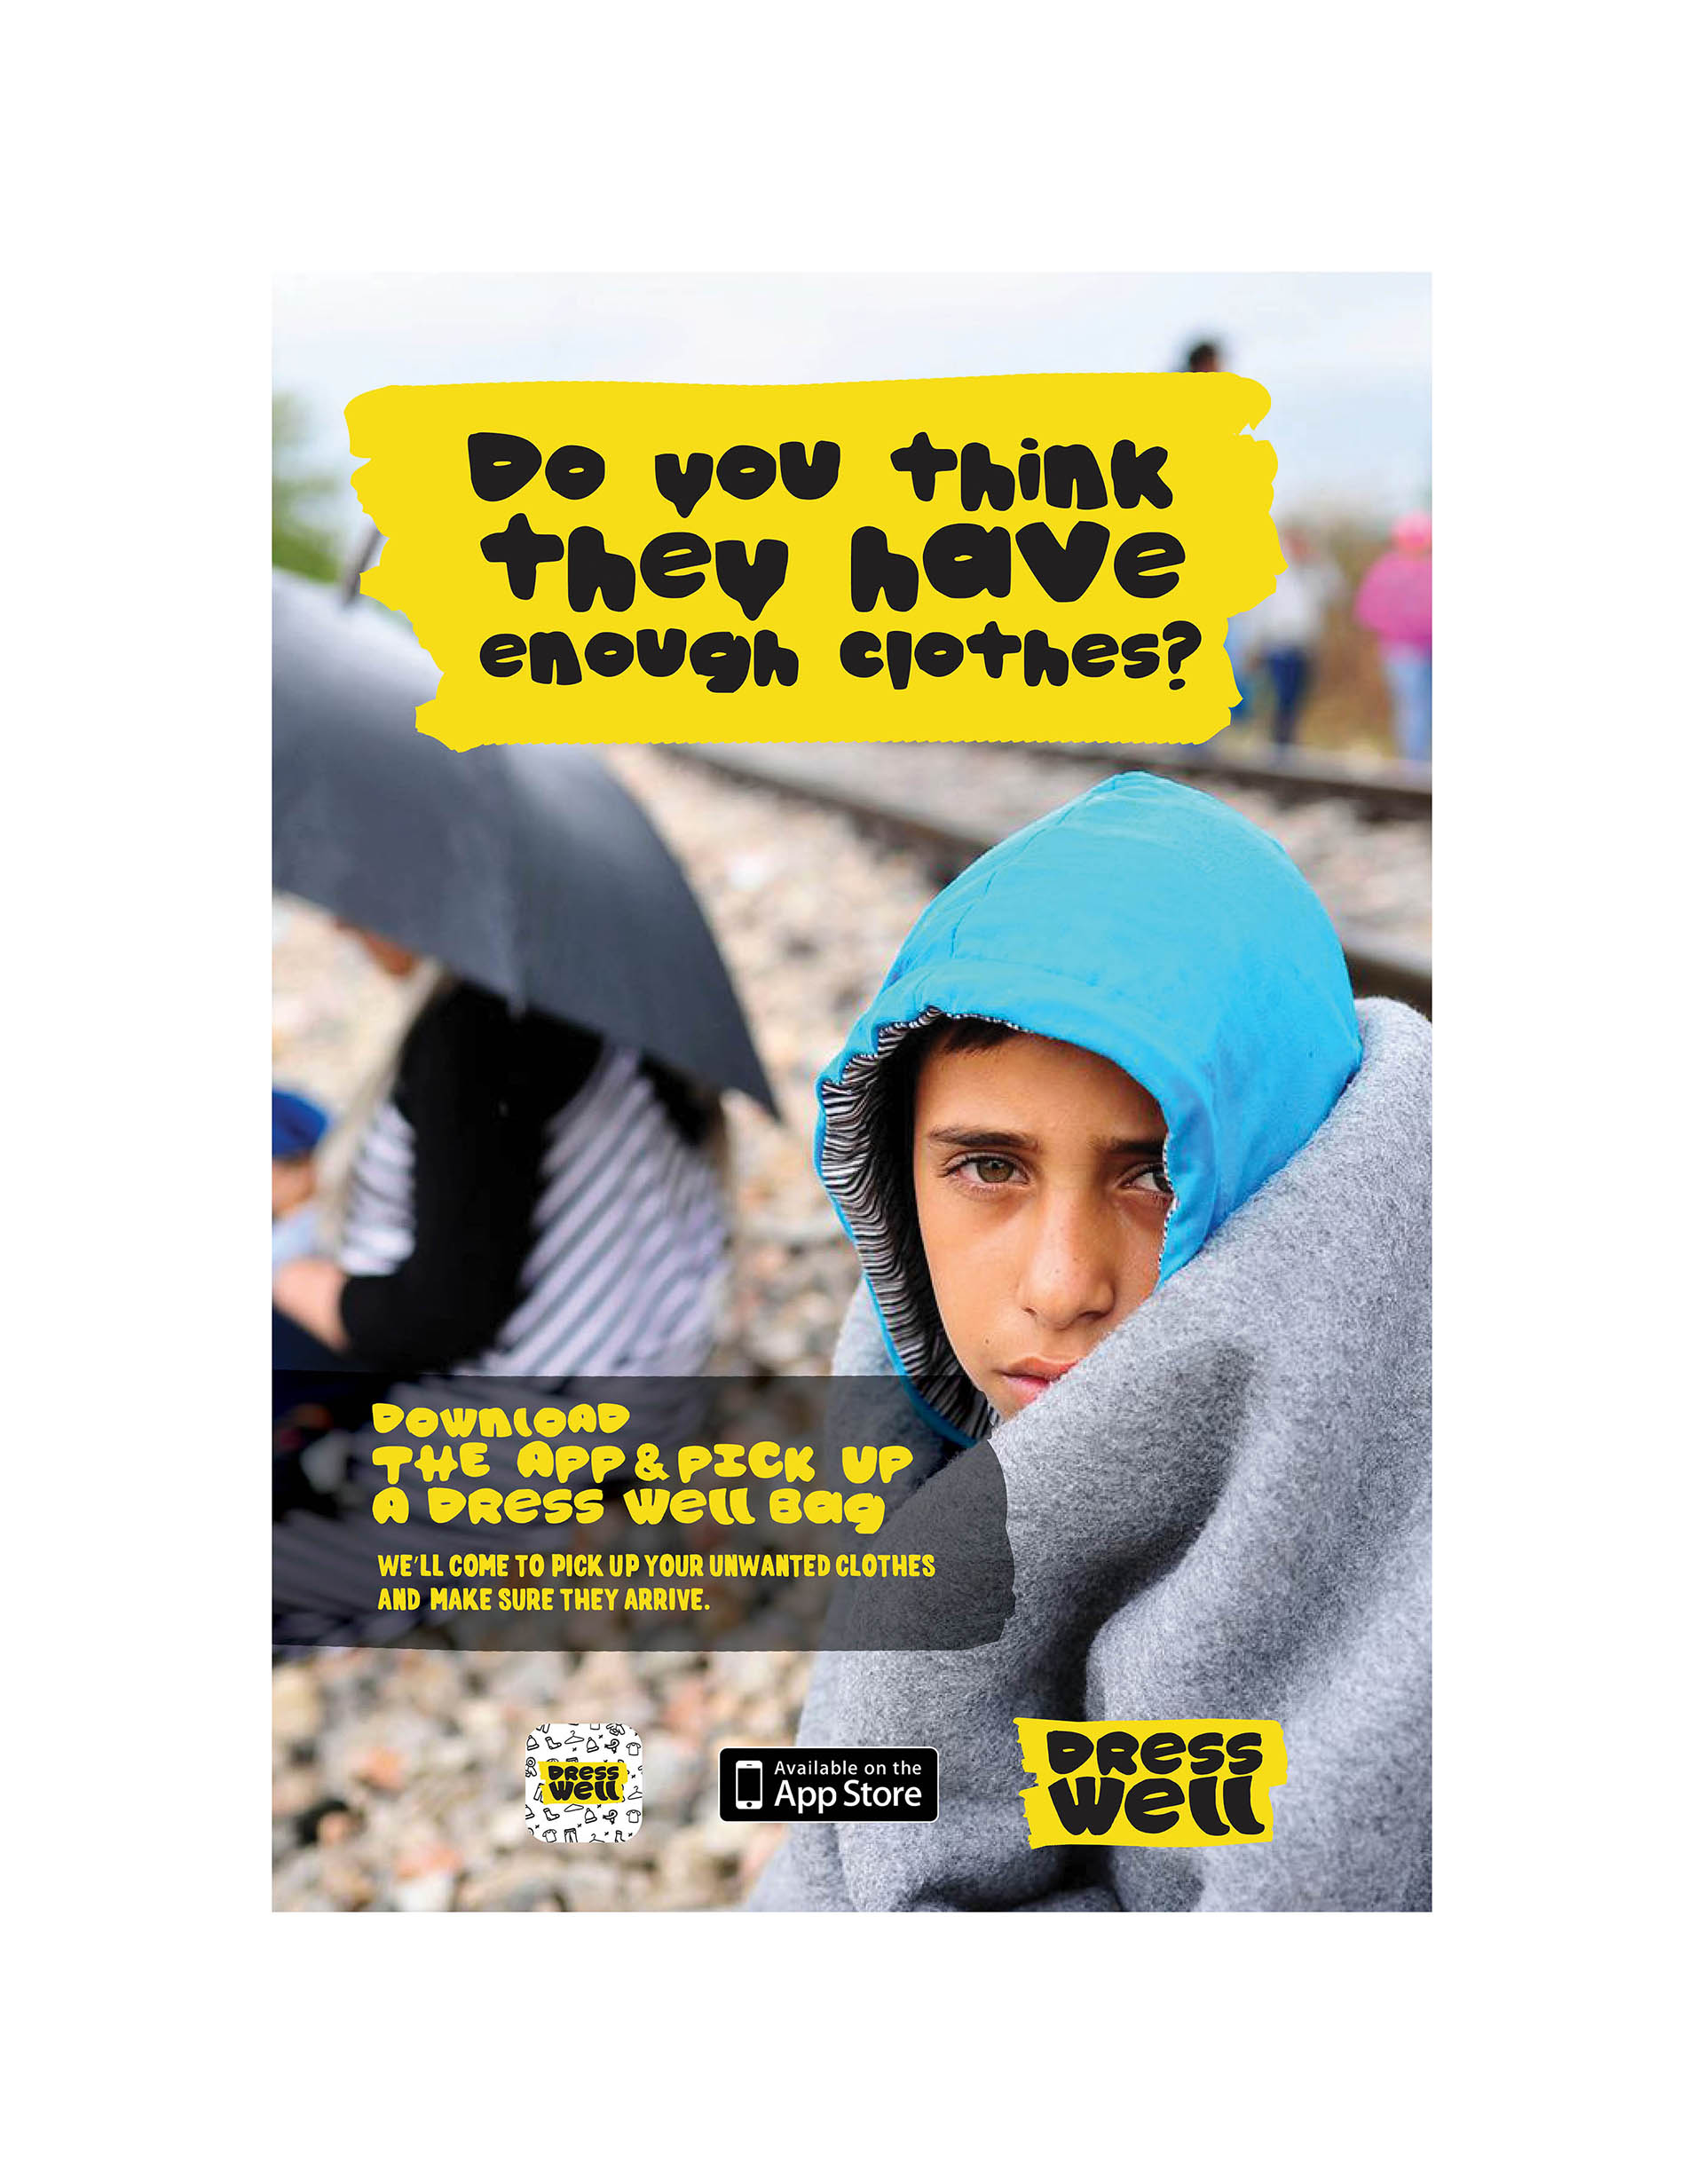 Poster of Dress Well App campaign